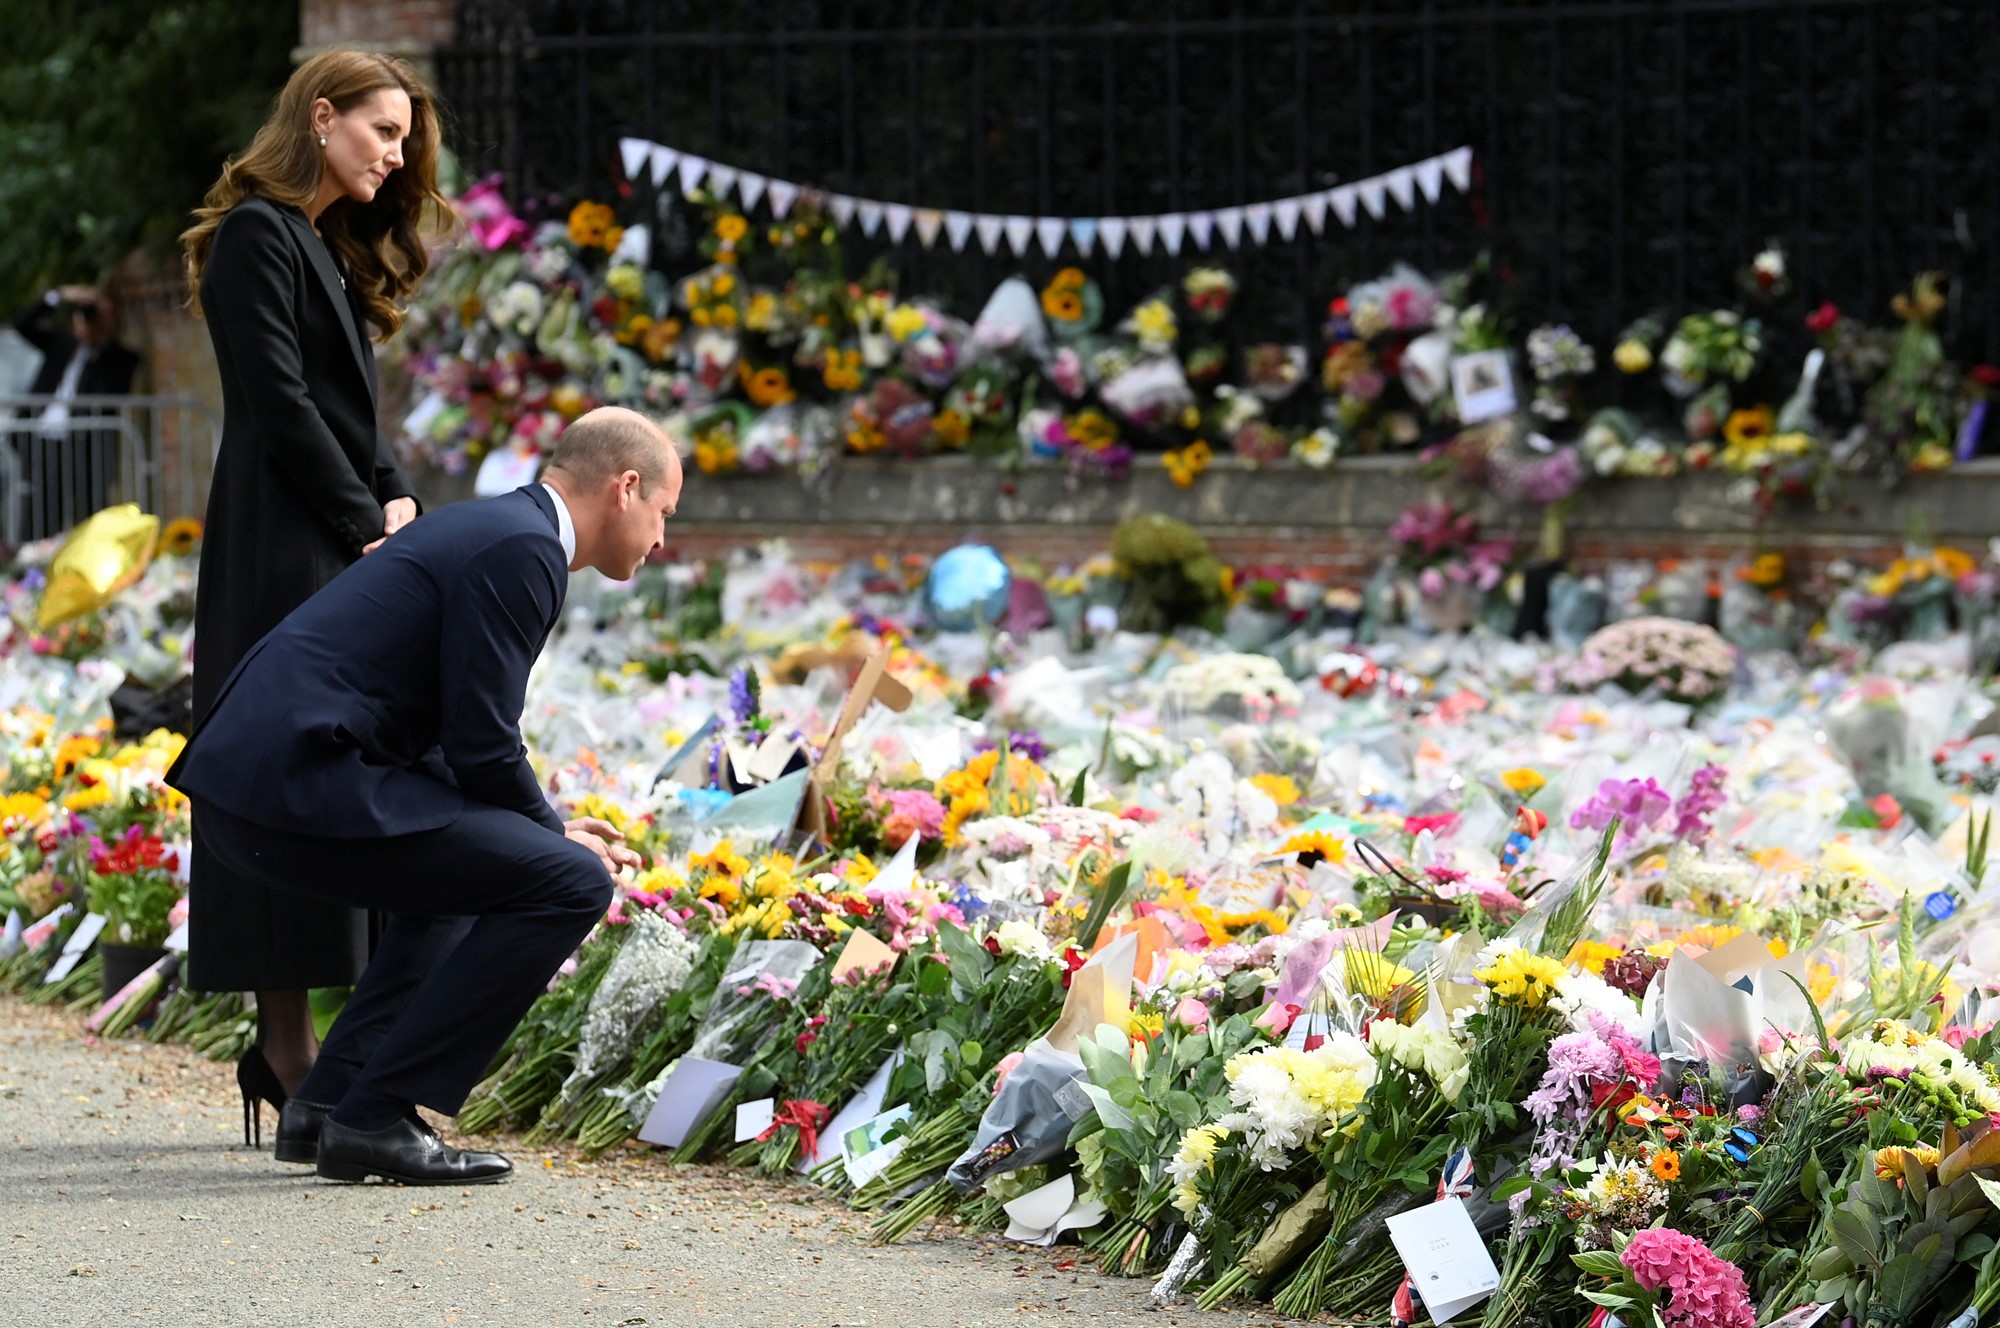 Will bends down to view a bed of flowers as Kate stands beside him.